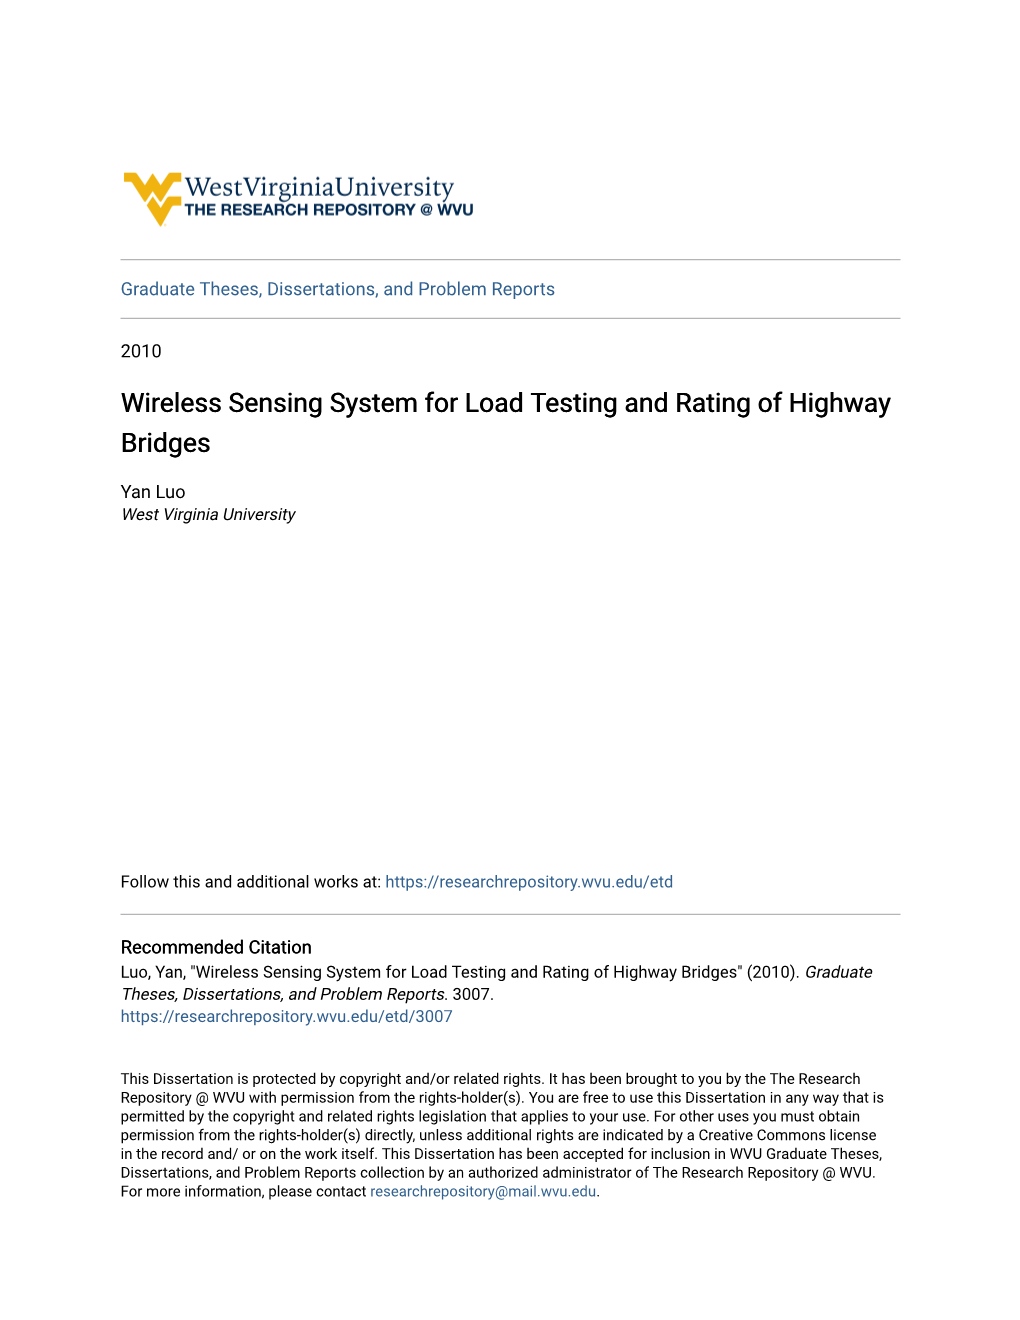 Wireless Sensing System for Load Testing and Rating of Highway Bridges